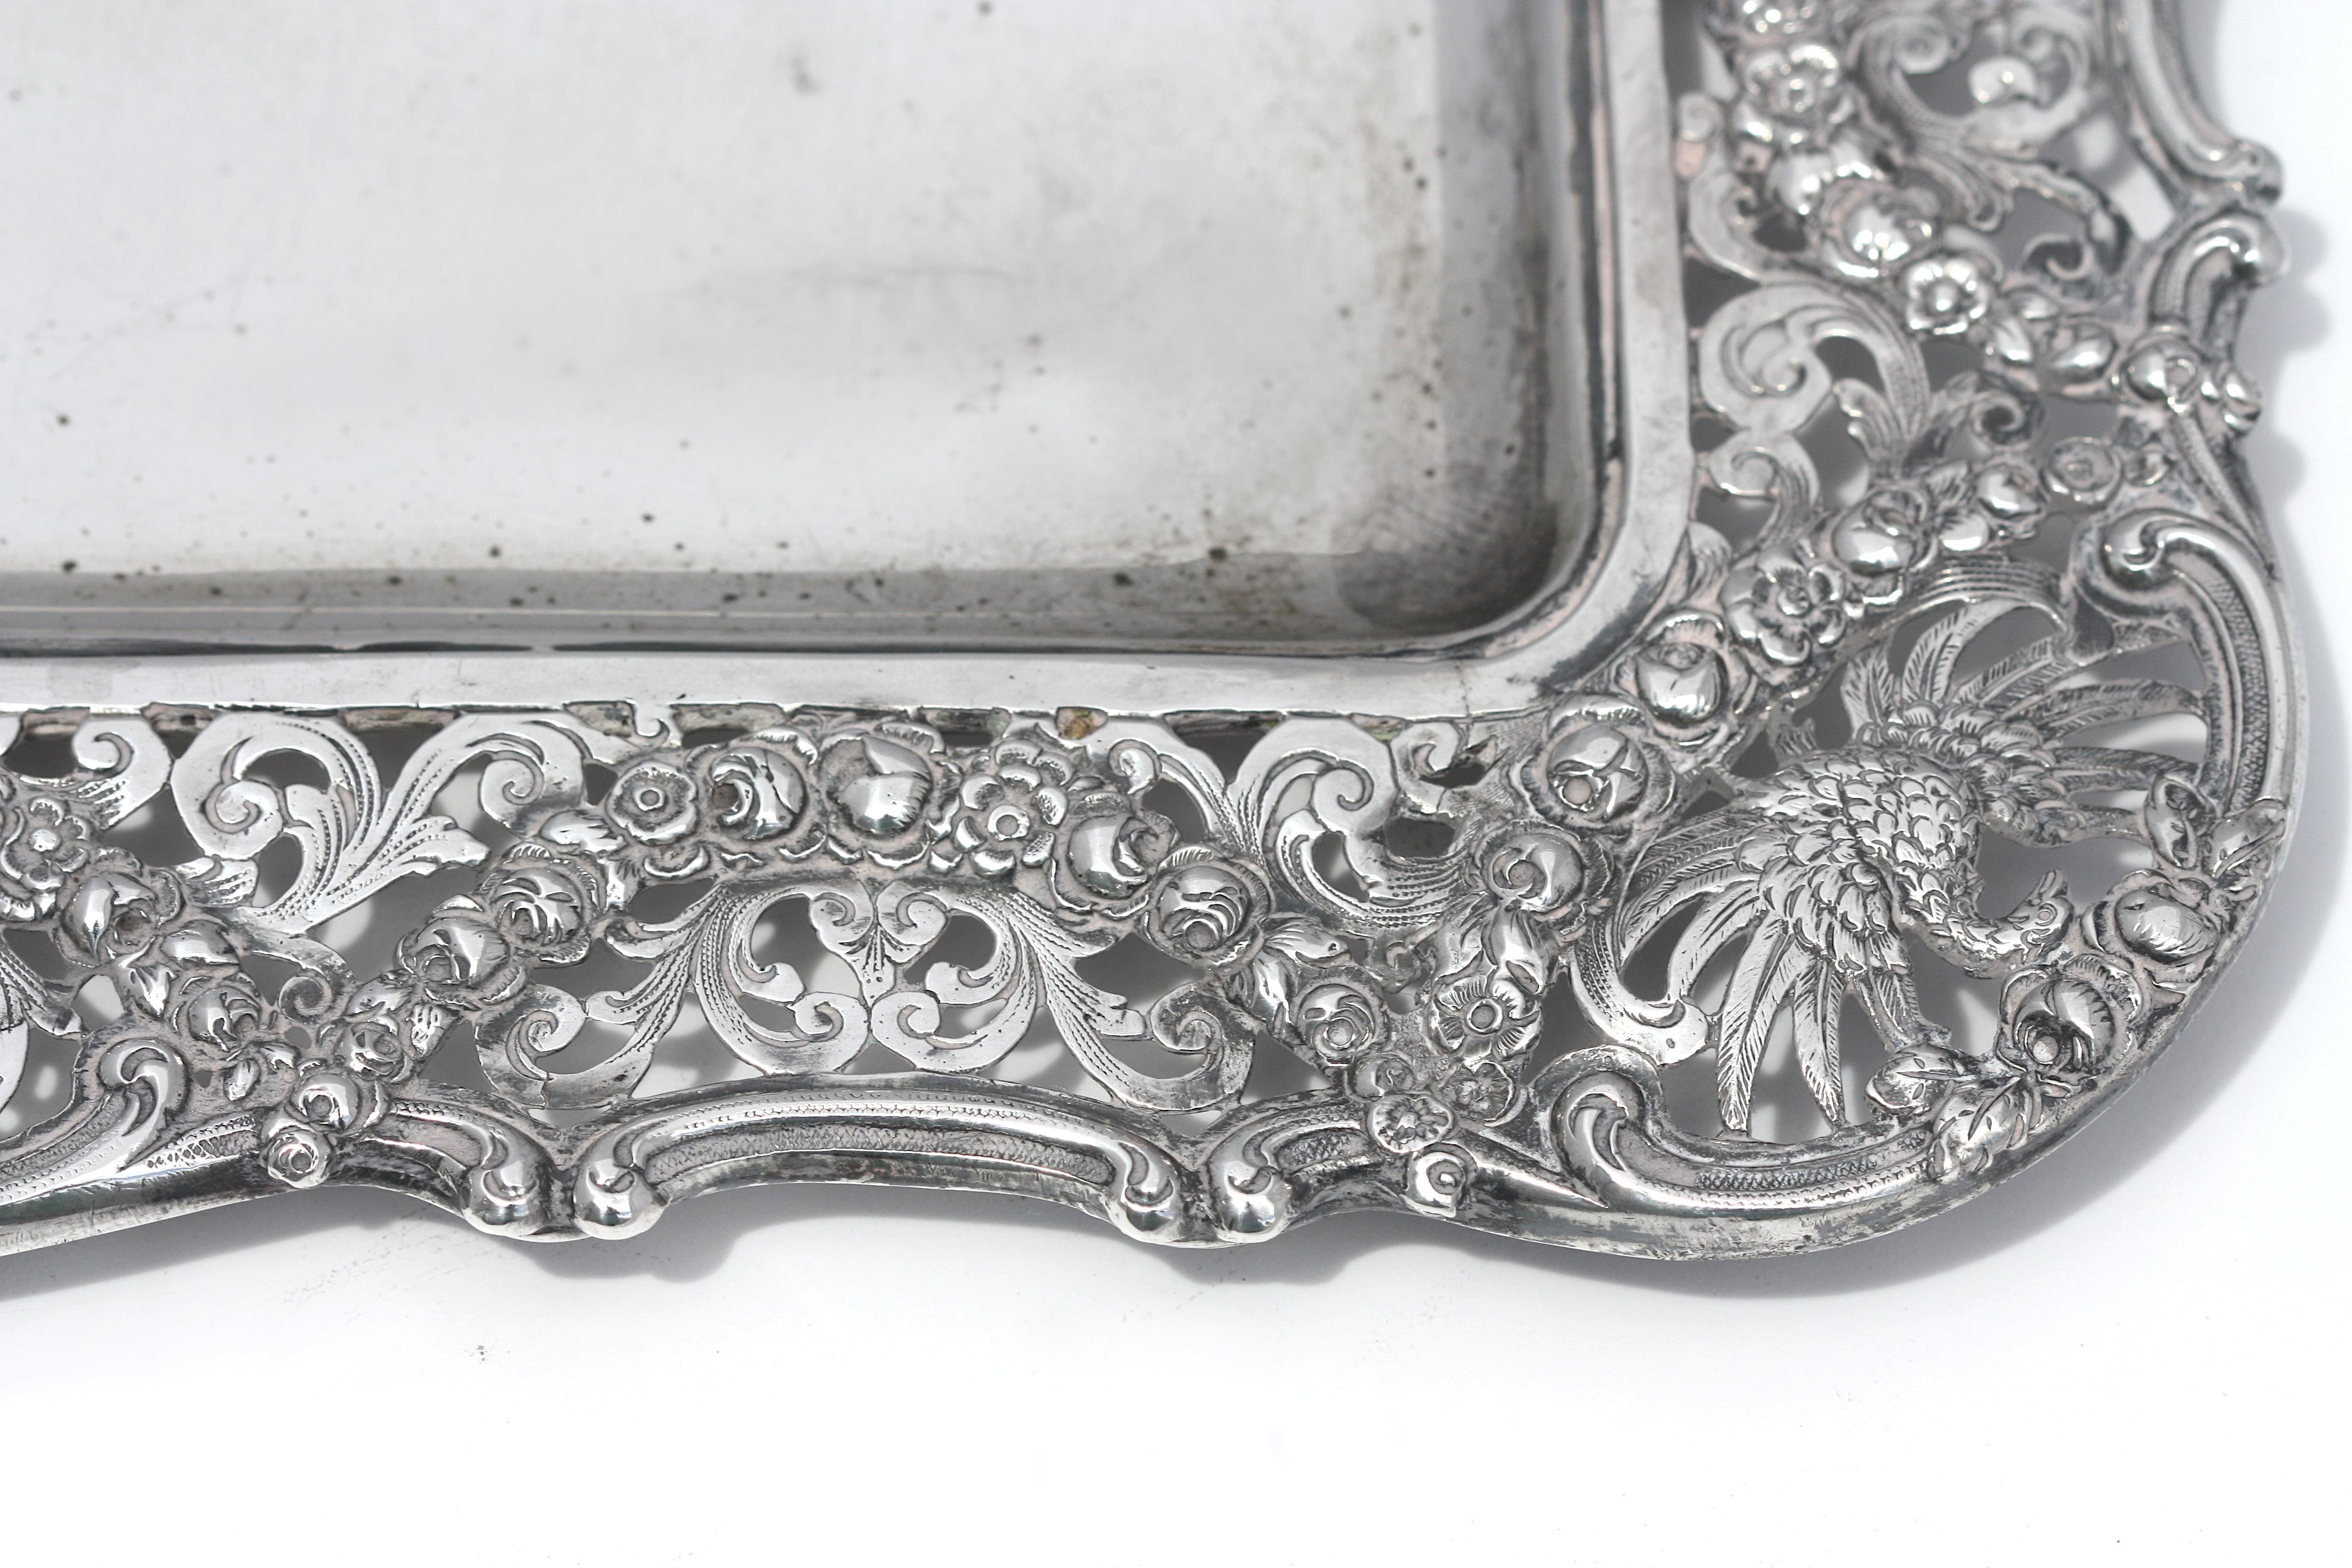  Continental Silver Rectangular Tray, Probably German For Sale 2